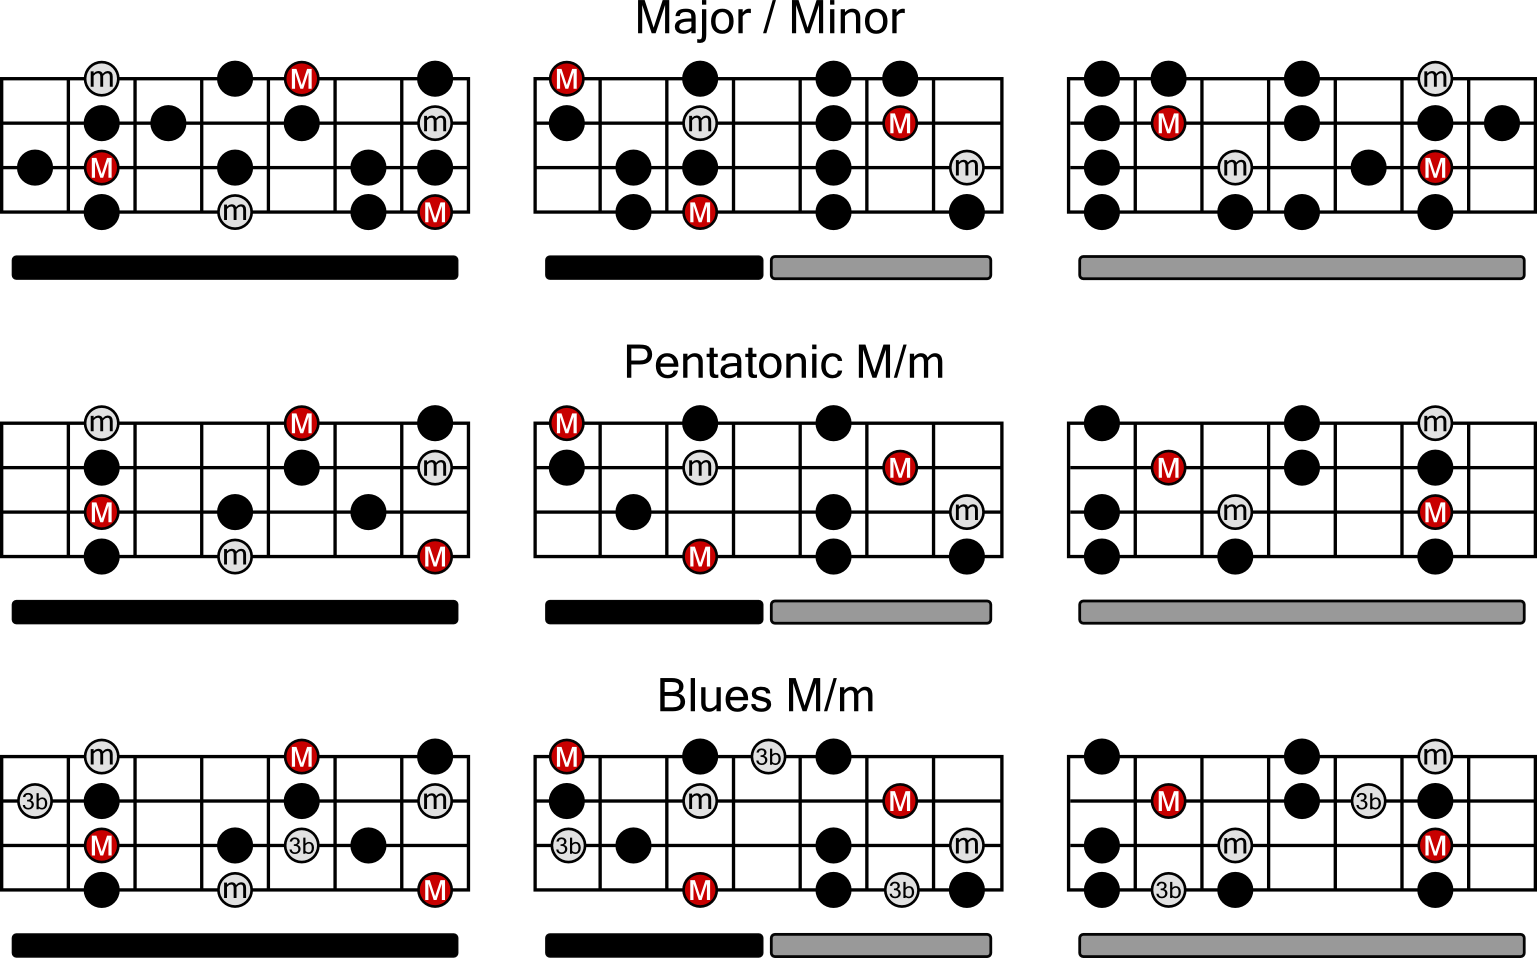 guitar modes chart with notes